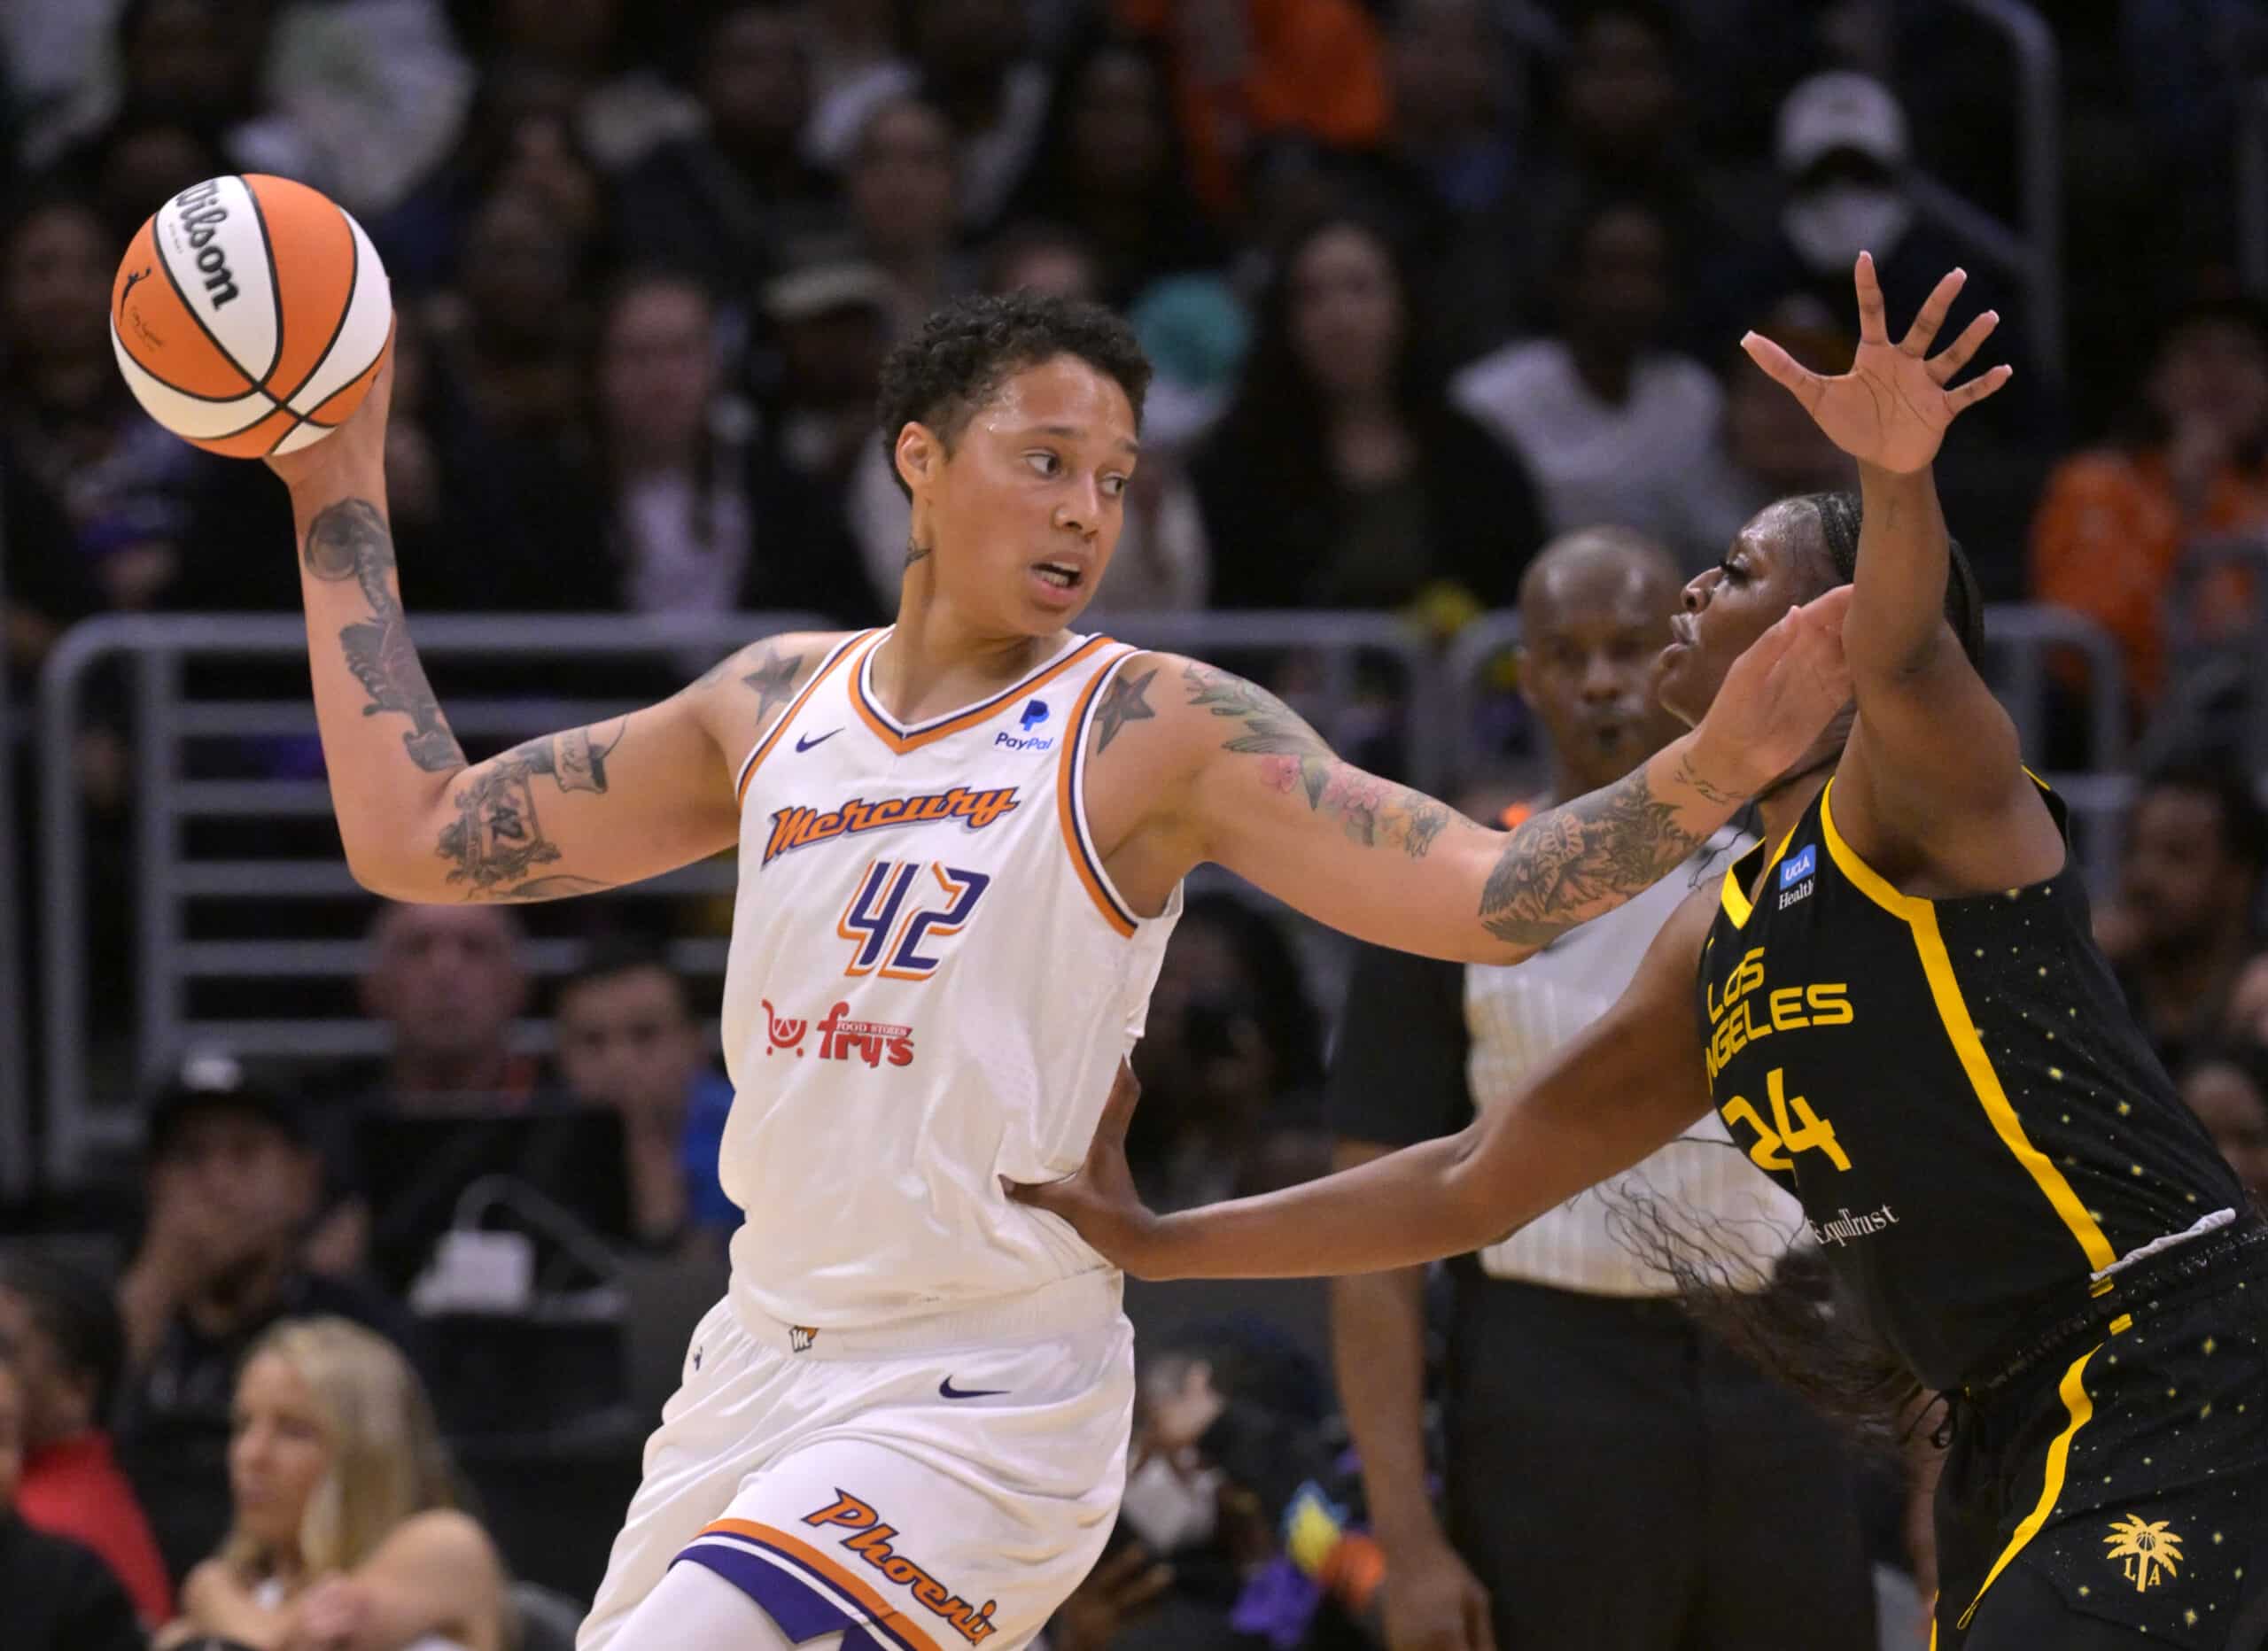 ESPN's broadcast was the WNBA's most-viewed regular season game on cable in 24 years.